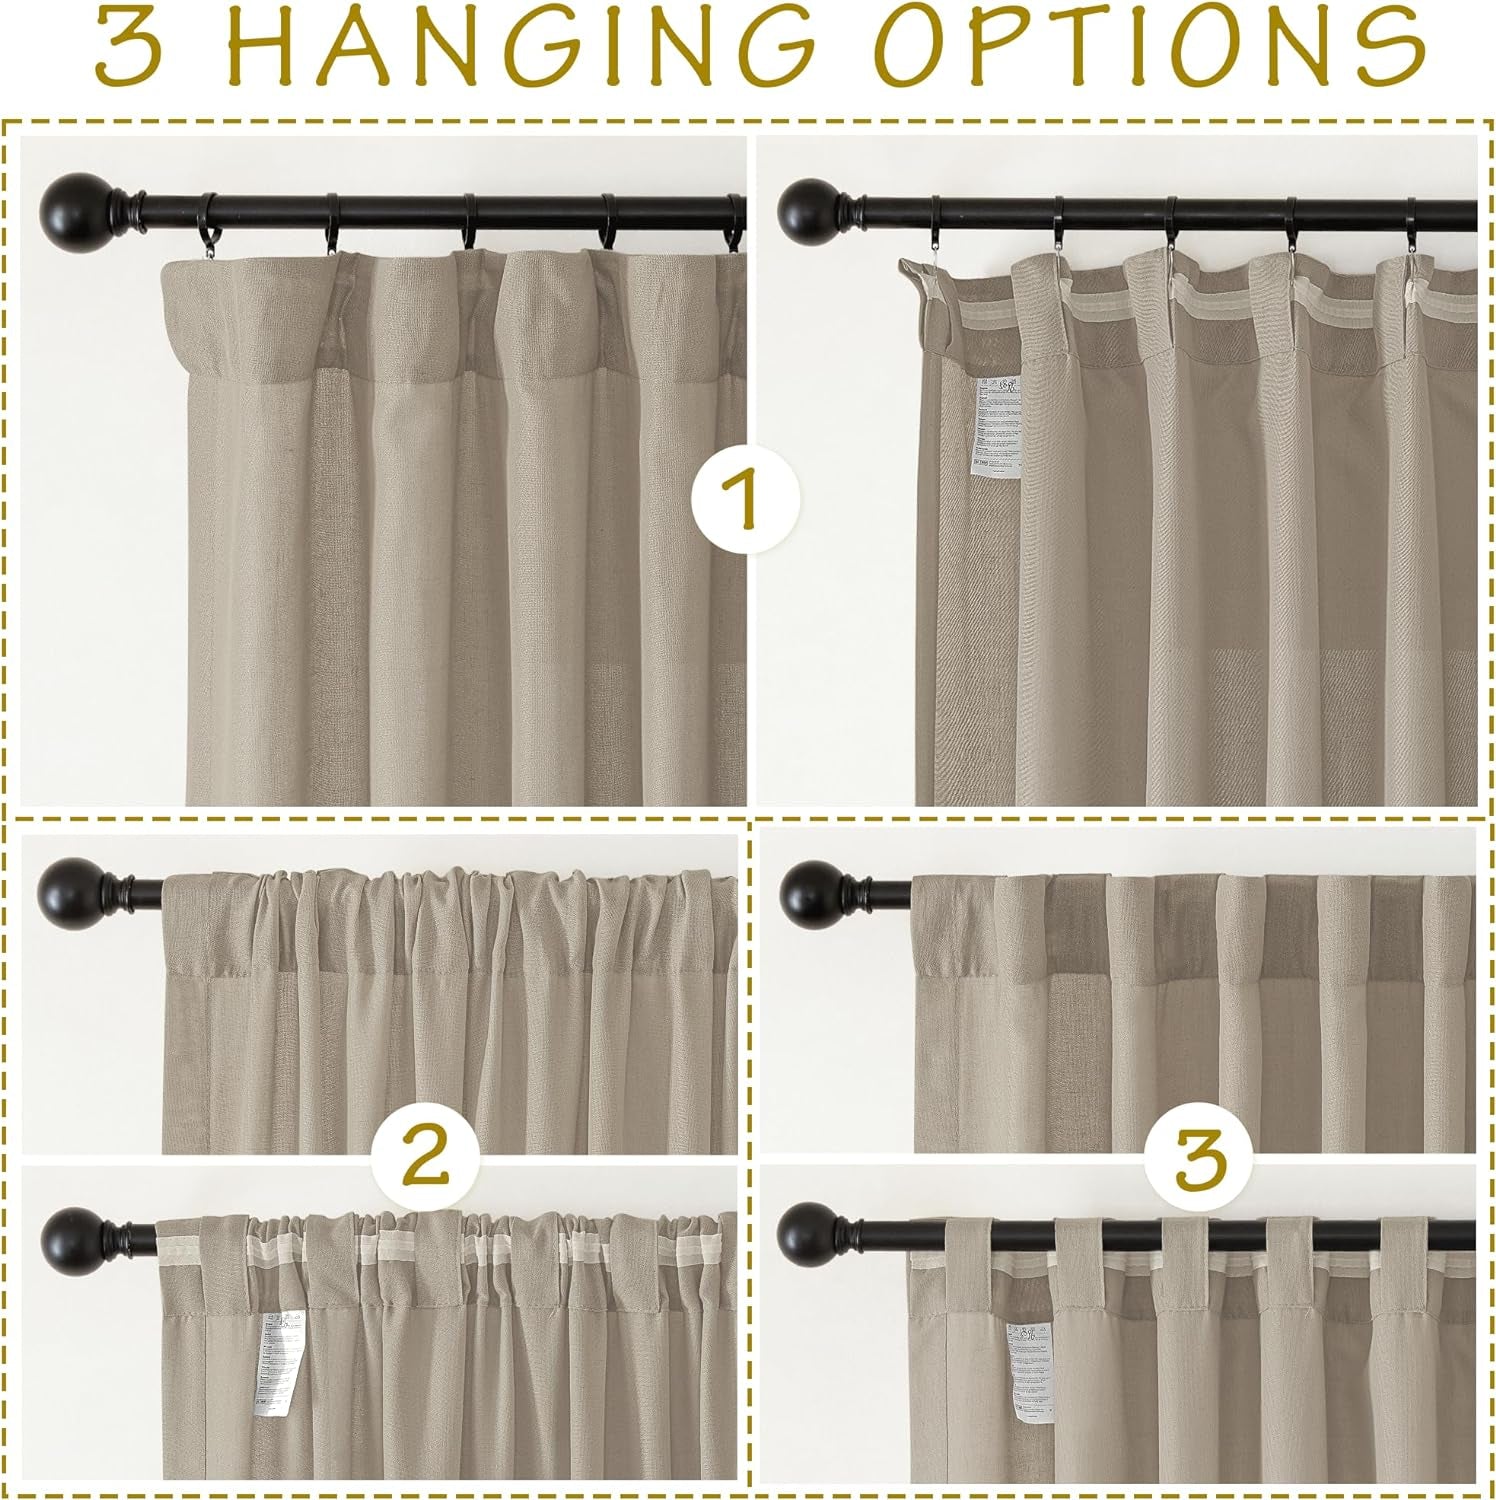 NICETOWN Taupe Thick Linen Curtains 96 Inches Long, Pinch Pleated Flax Linen Curtains Privacy Added Window Treatments with Light Filtering Drapes for Bedroom/Living Room, W50 X L96, 2 Panels  NICETOWN   